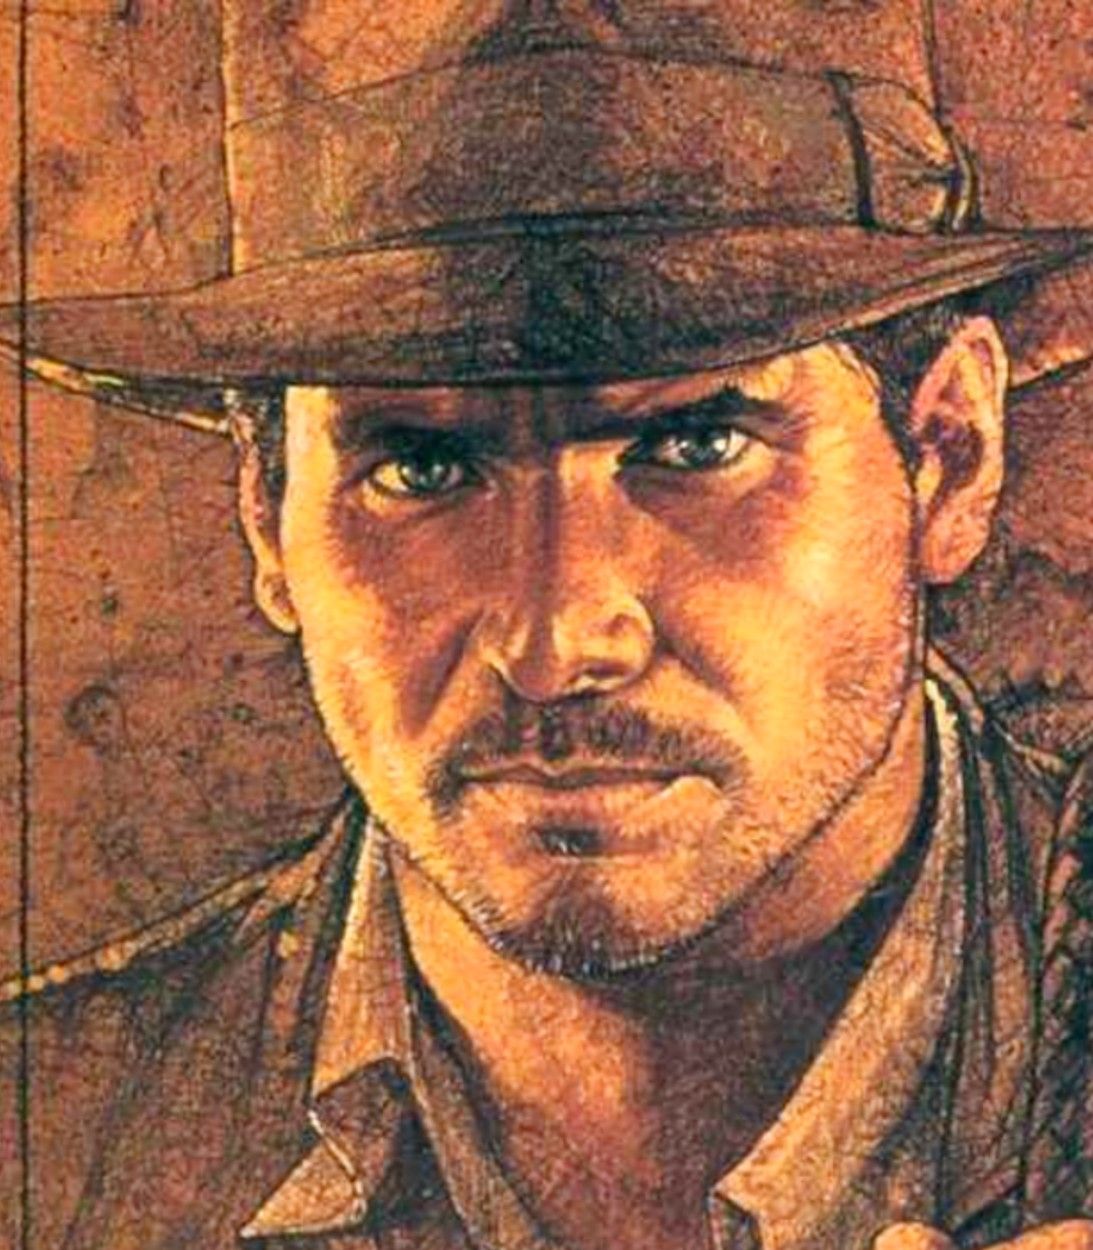 indiana jones game based on a cancelled movie vertical